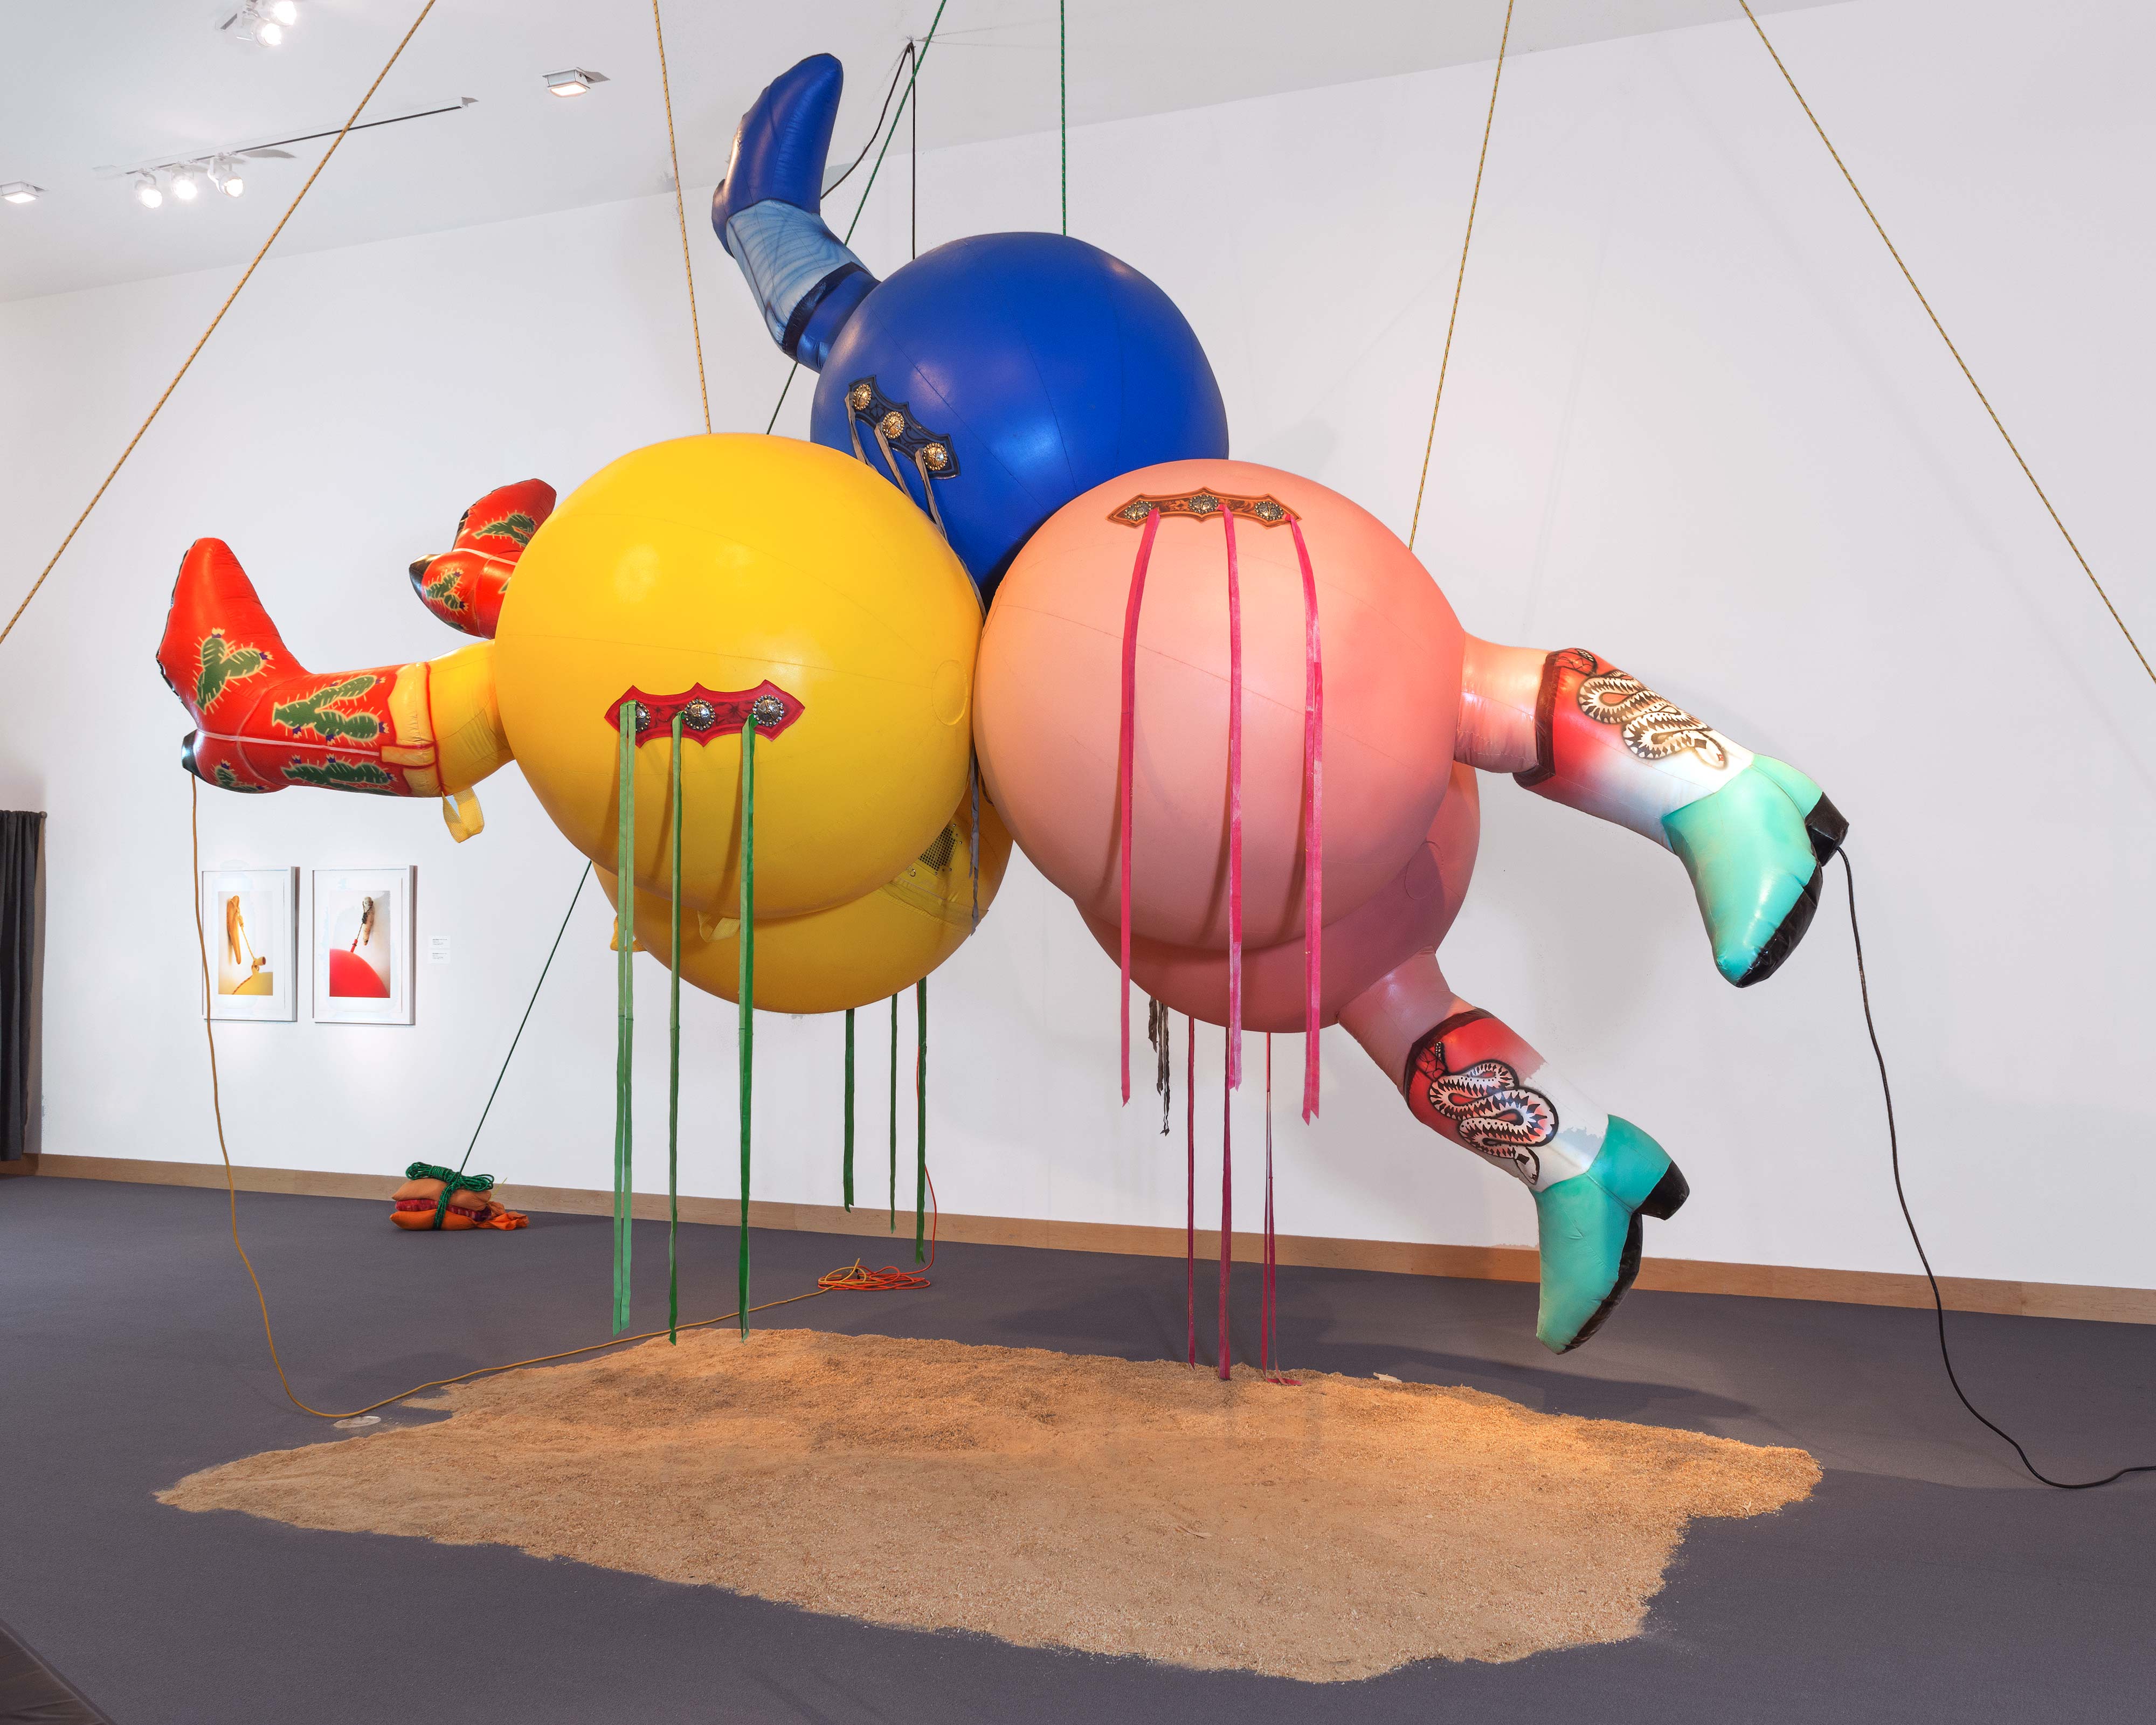 Nancy Davidson<br>Dust Up<br>2012<br>Vinyl coated nylon, rope, leather, blower, sandbags, sawdust<br>20 x 20 x 16 ft<br>installation view at the Boca Raton Museum of Art